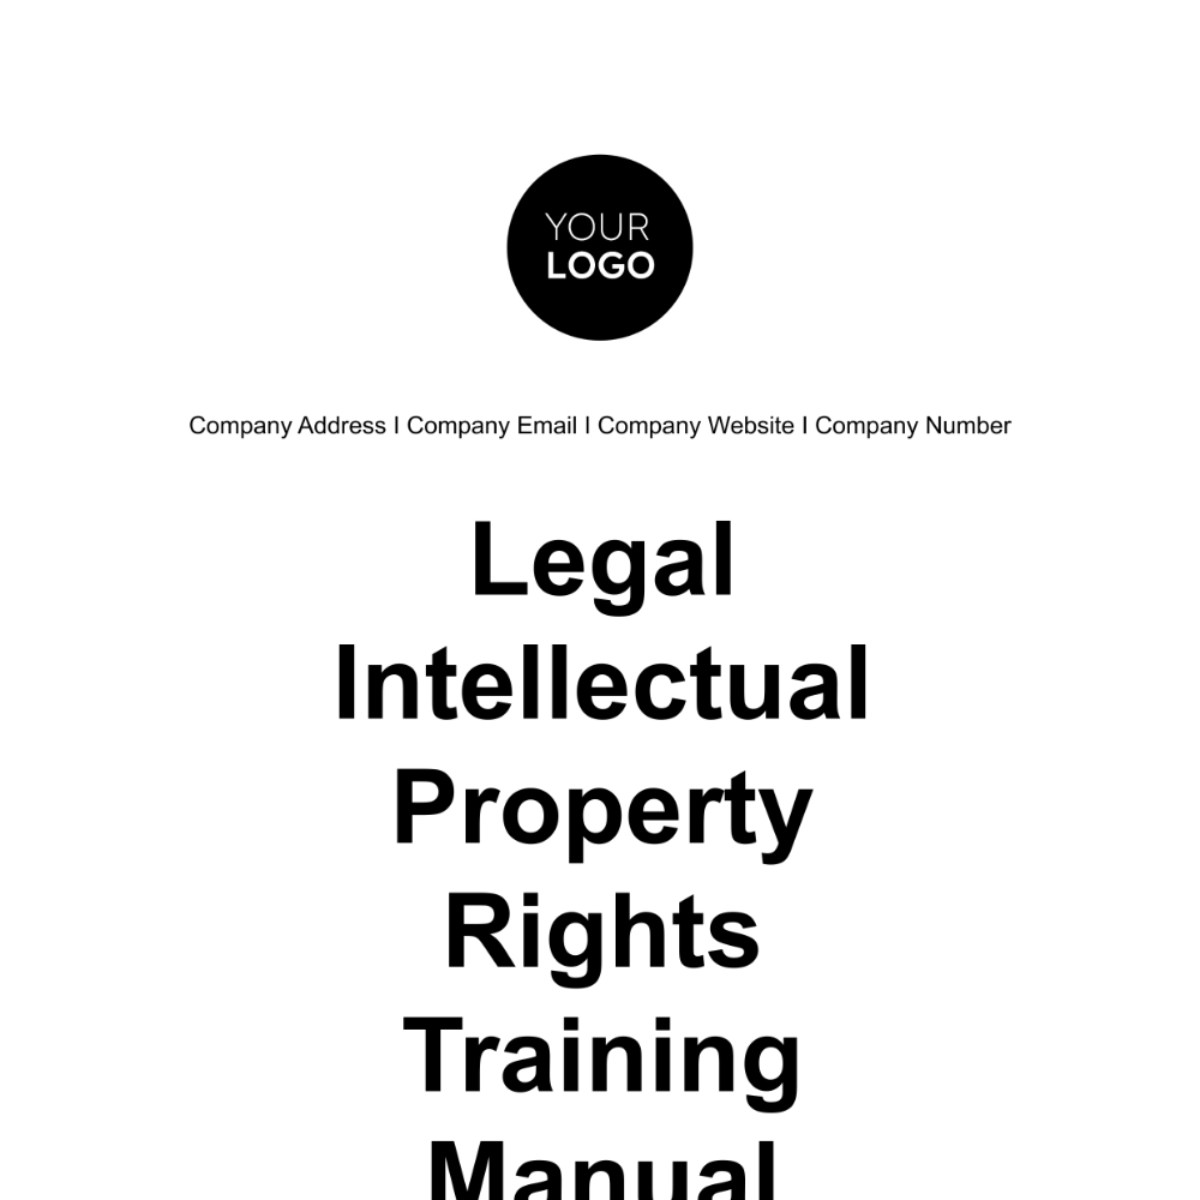 Legal Intellectual Property Rights Training Manual Template